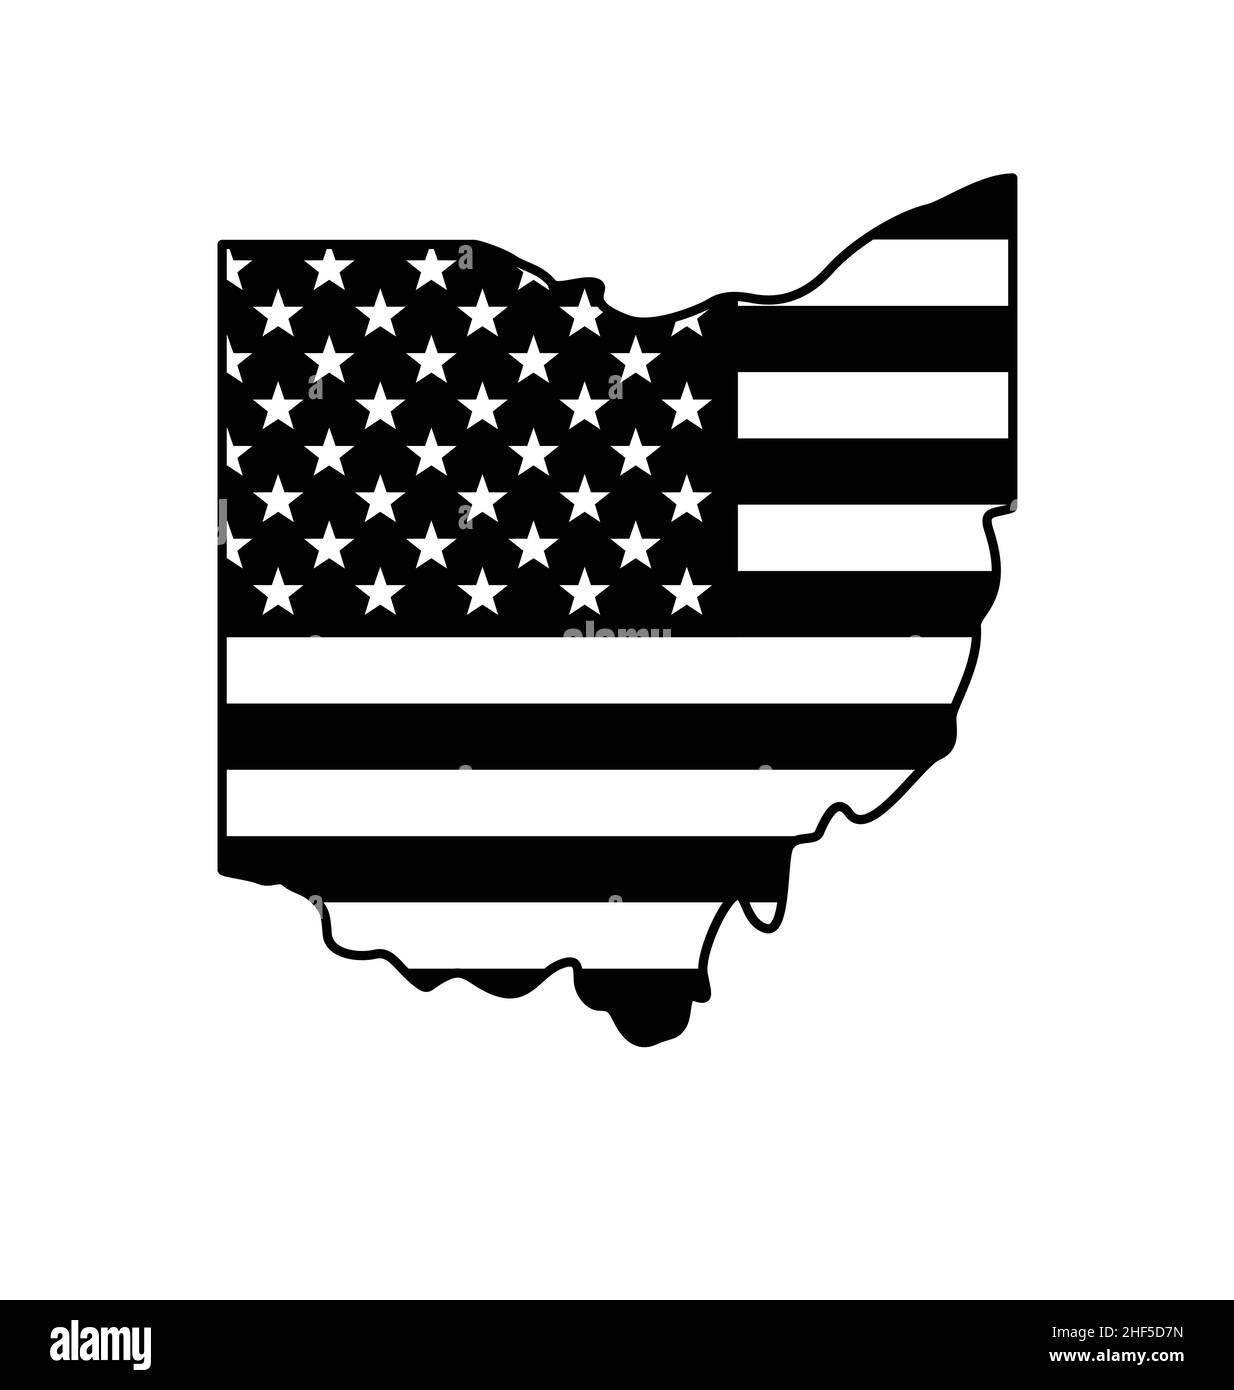 ohio oh state shape with USA united states of america flag black and white vector isolated on white background Stock Vector